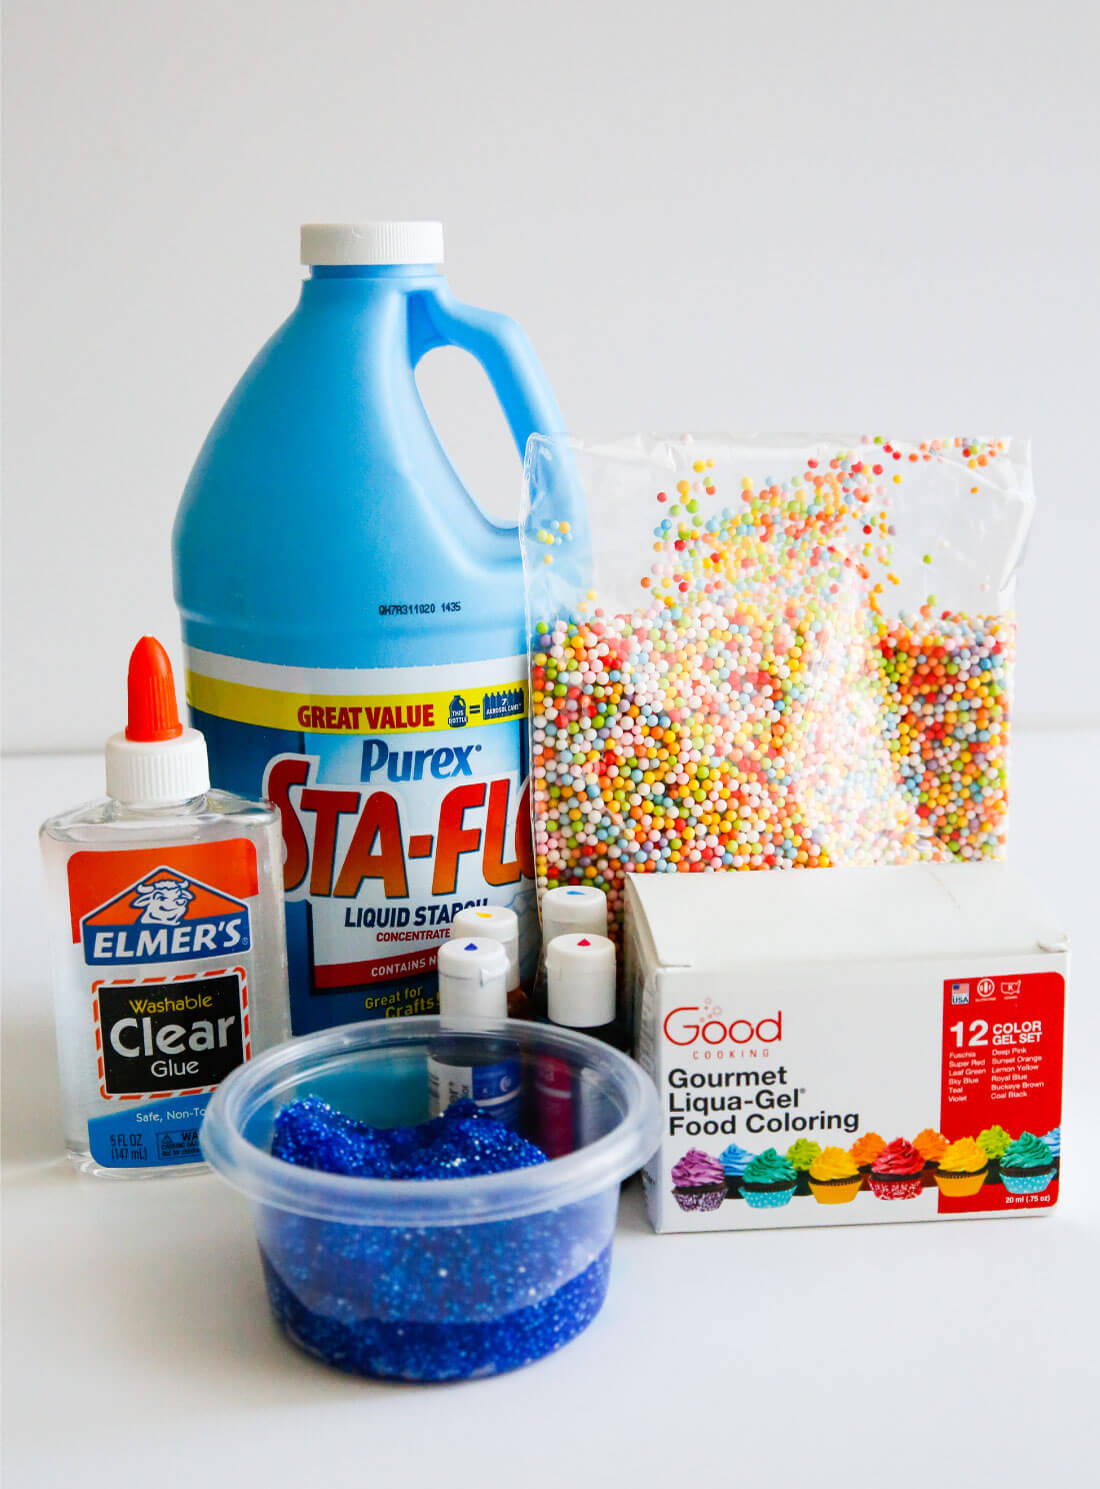 How to make floam - a floam recipe to try out for a fun kids activity! Ingredients needed to make floam. from www.thirtyhandmadedays.com